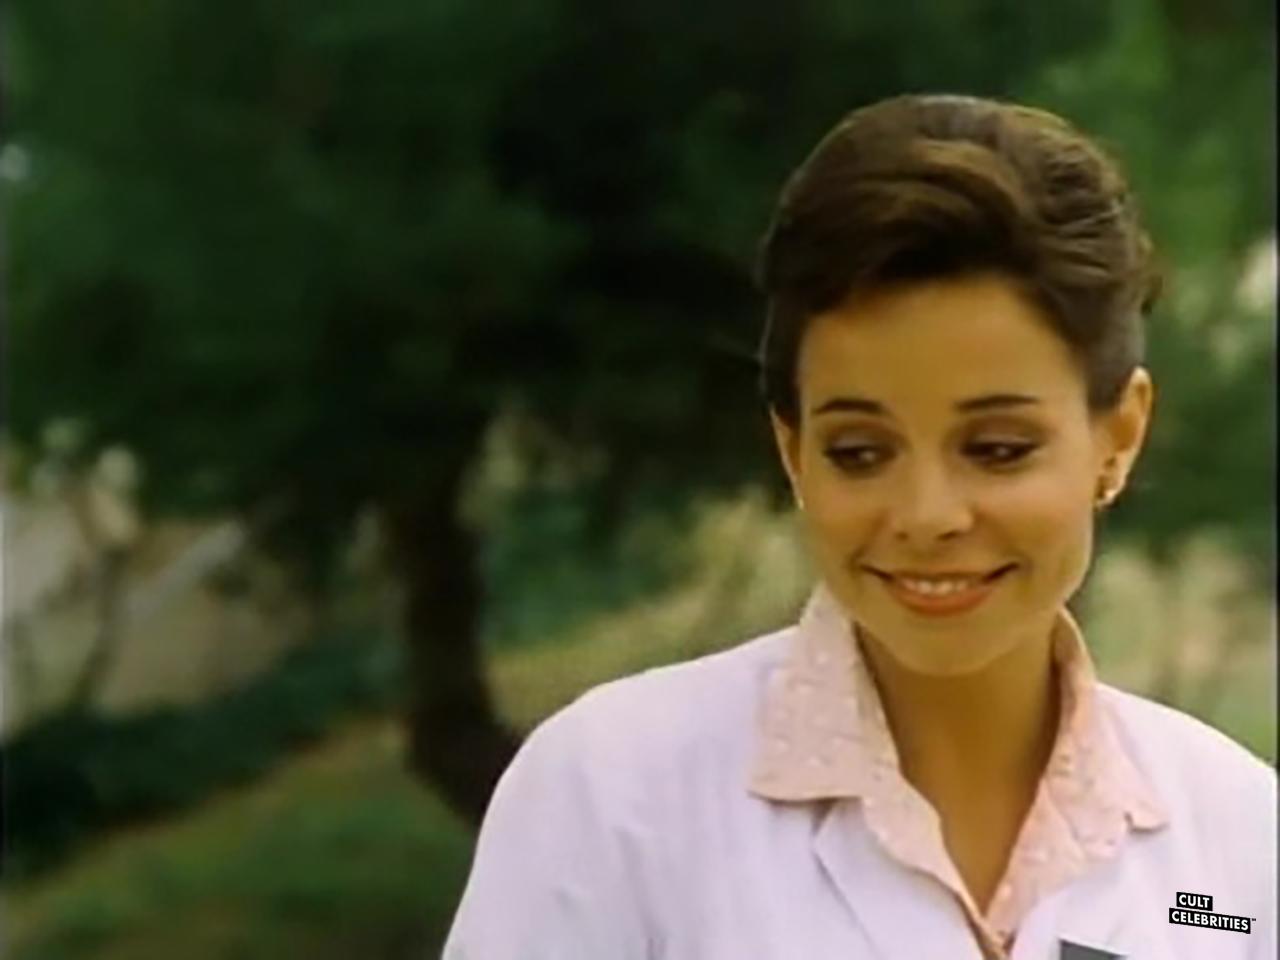 Debra Blee in Hamburger: The Motion Picture (1986)